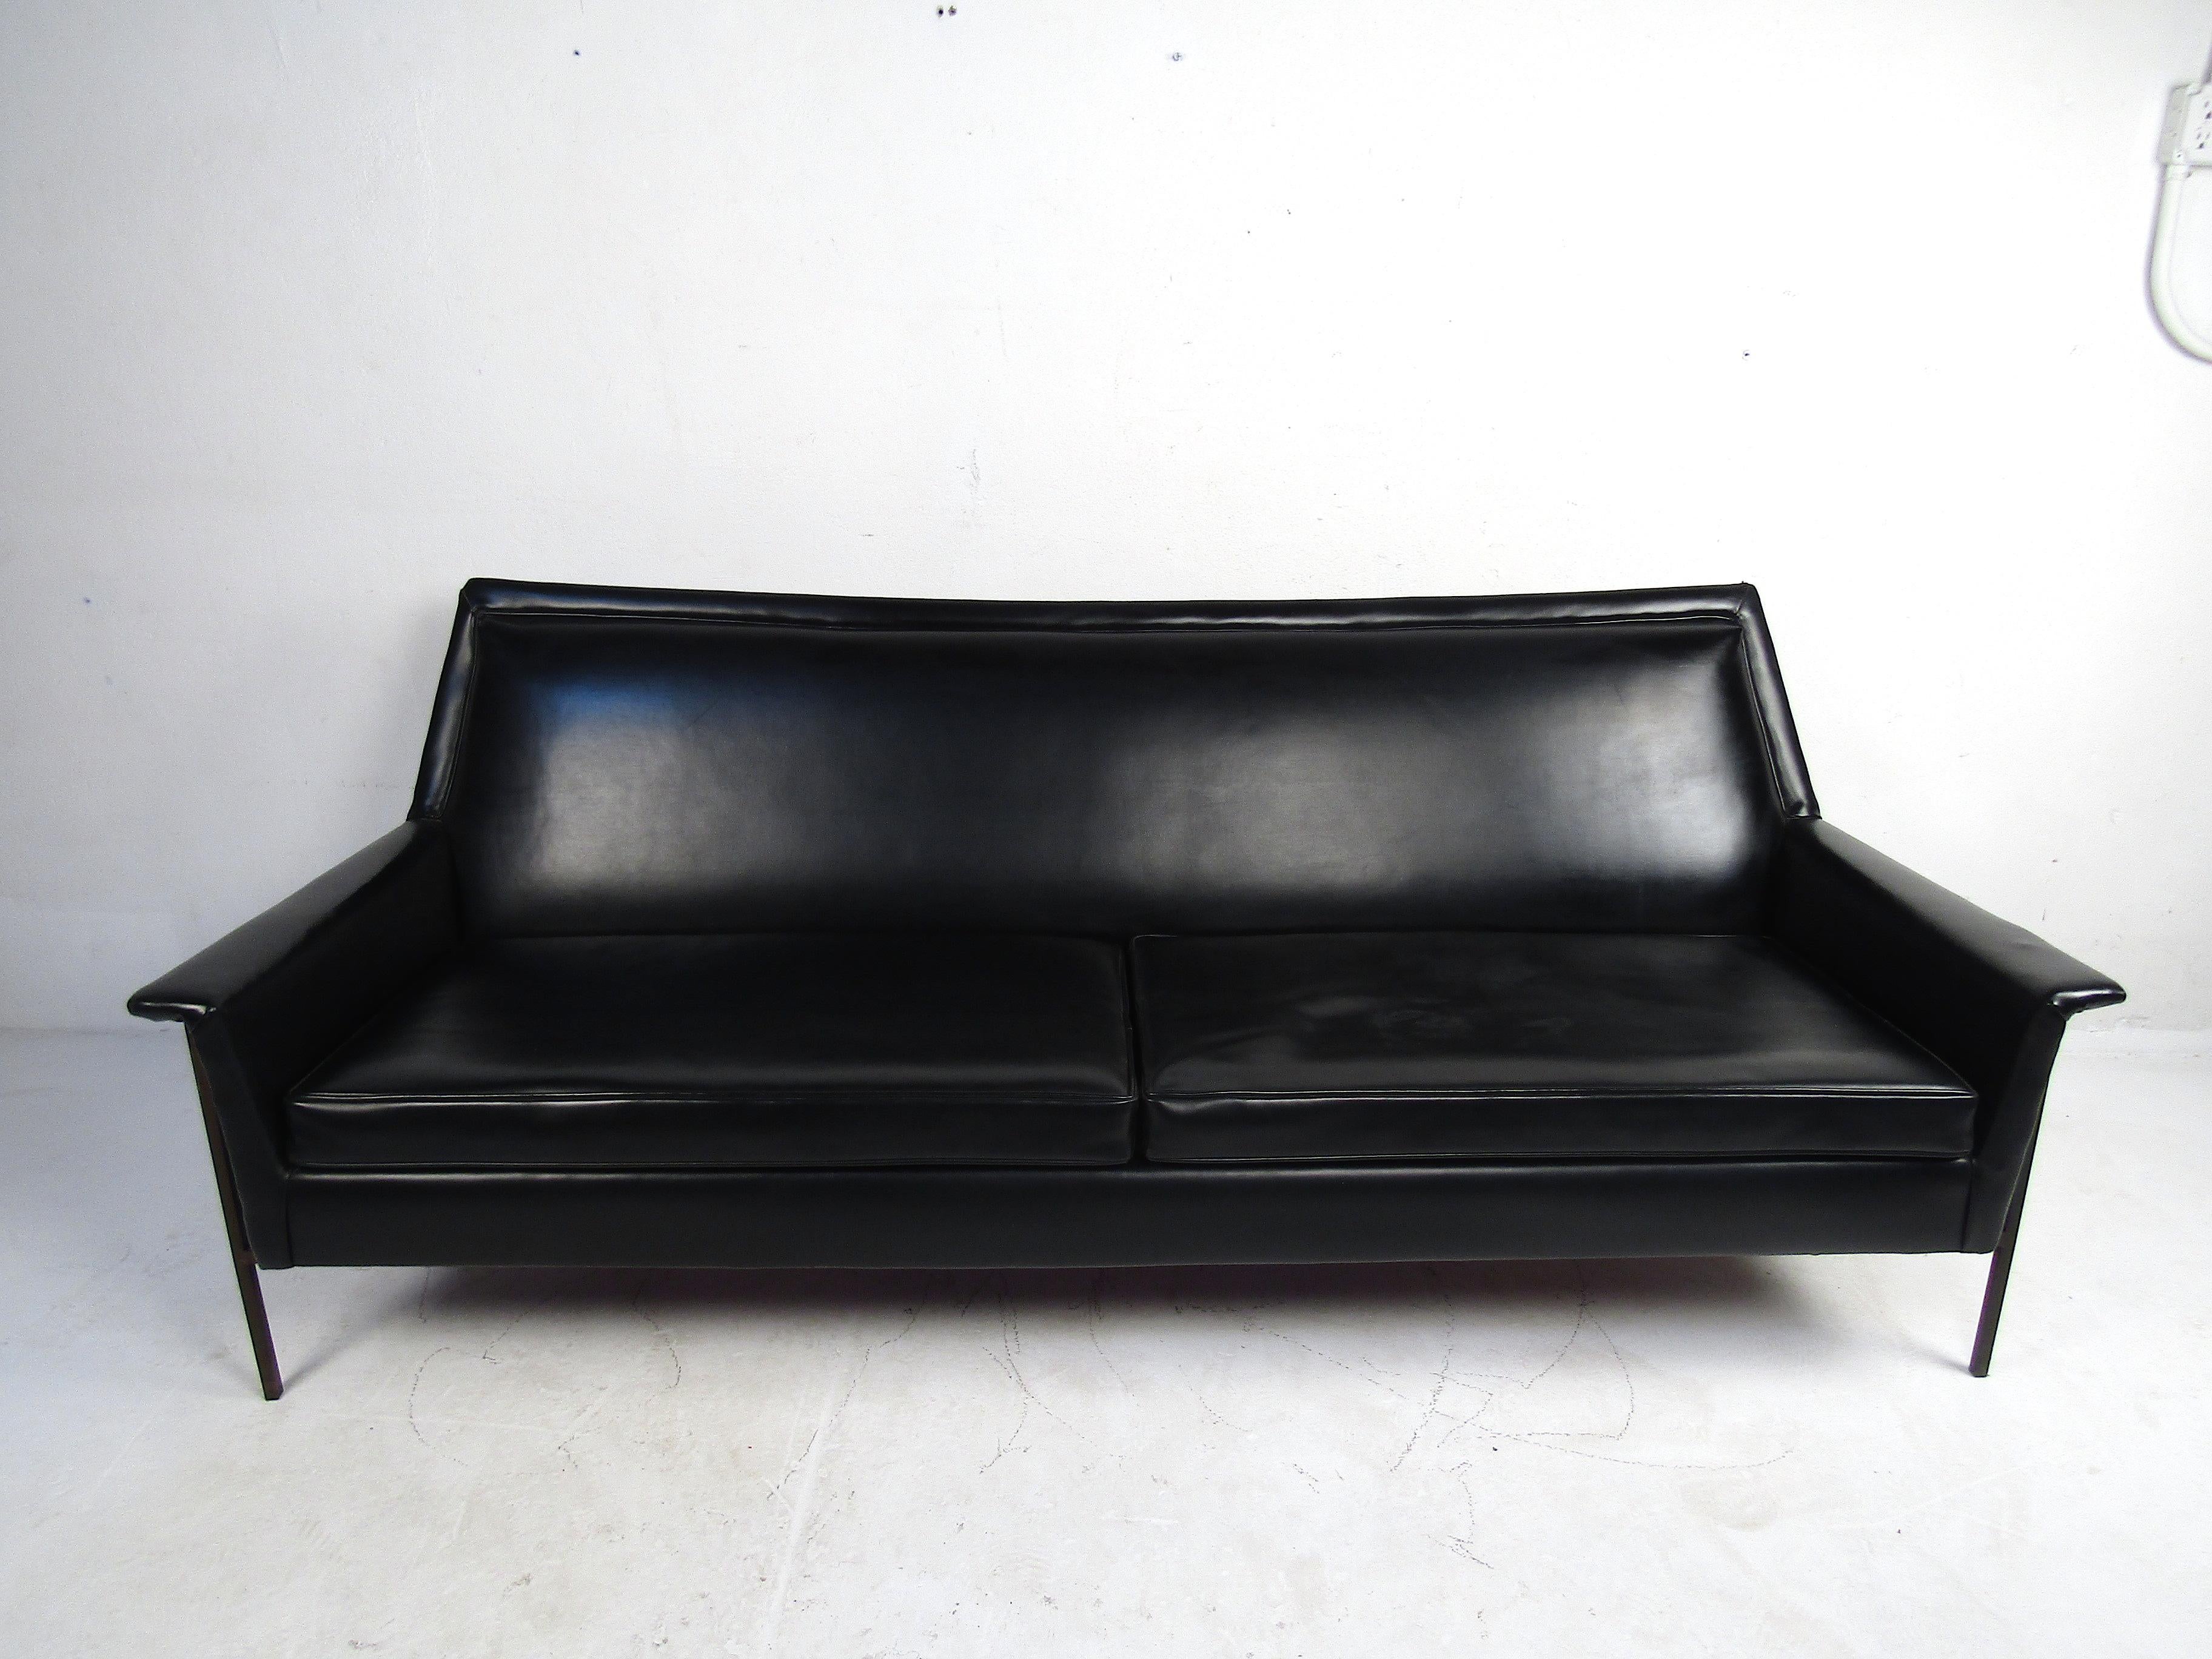 Mid-Century Modern sofa by Harvey Probber. Spacious seating area covered in a vintage black faux-leather upholstery. Sturdy brass frame with matching decorative nails lining the corners of the piece. This sofa would make a great centerpiece for any